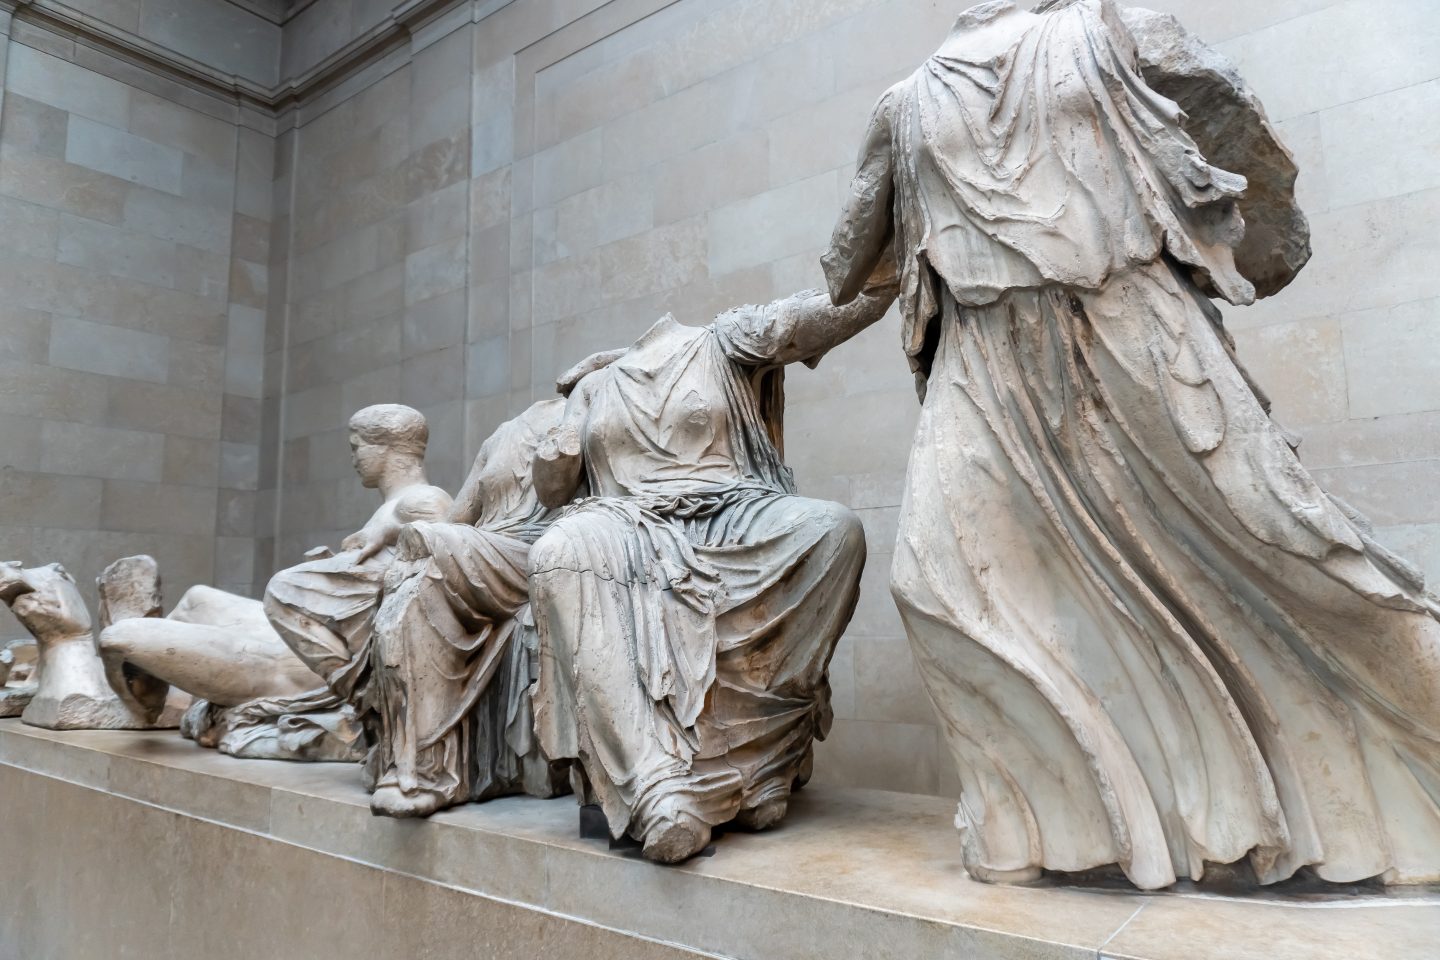 Greece has demanded the return of the Elgin Marbles (pictured here)